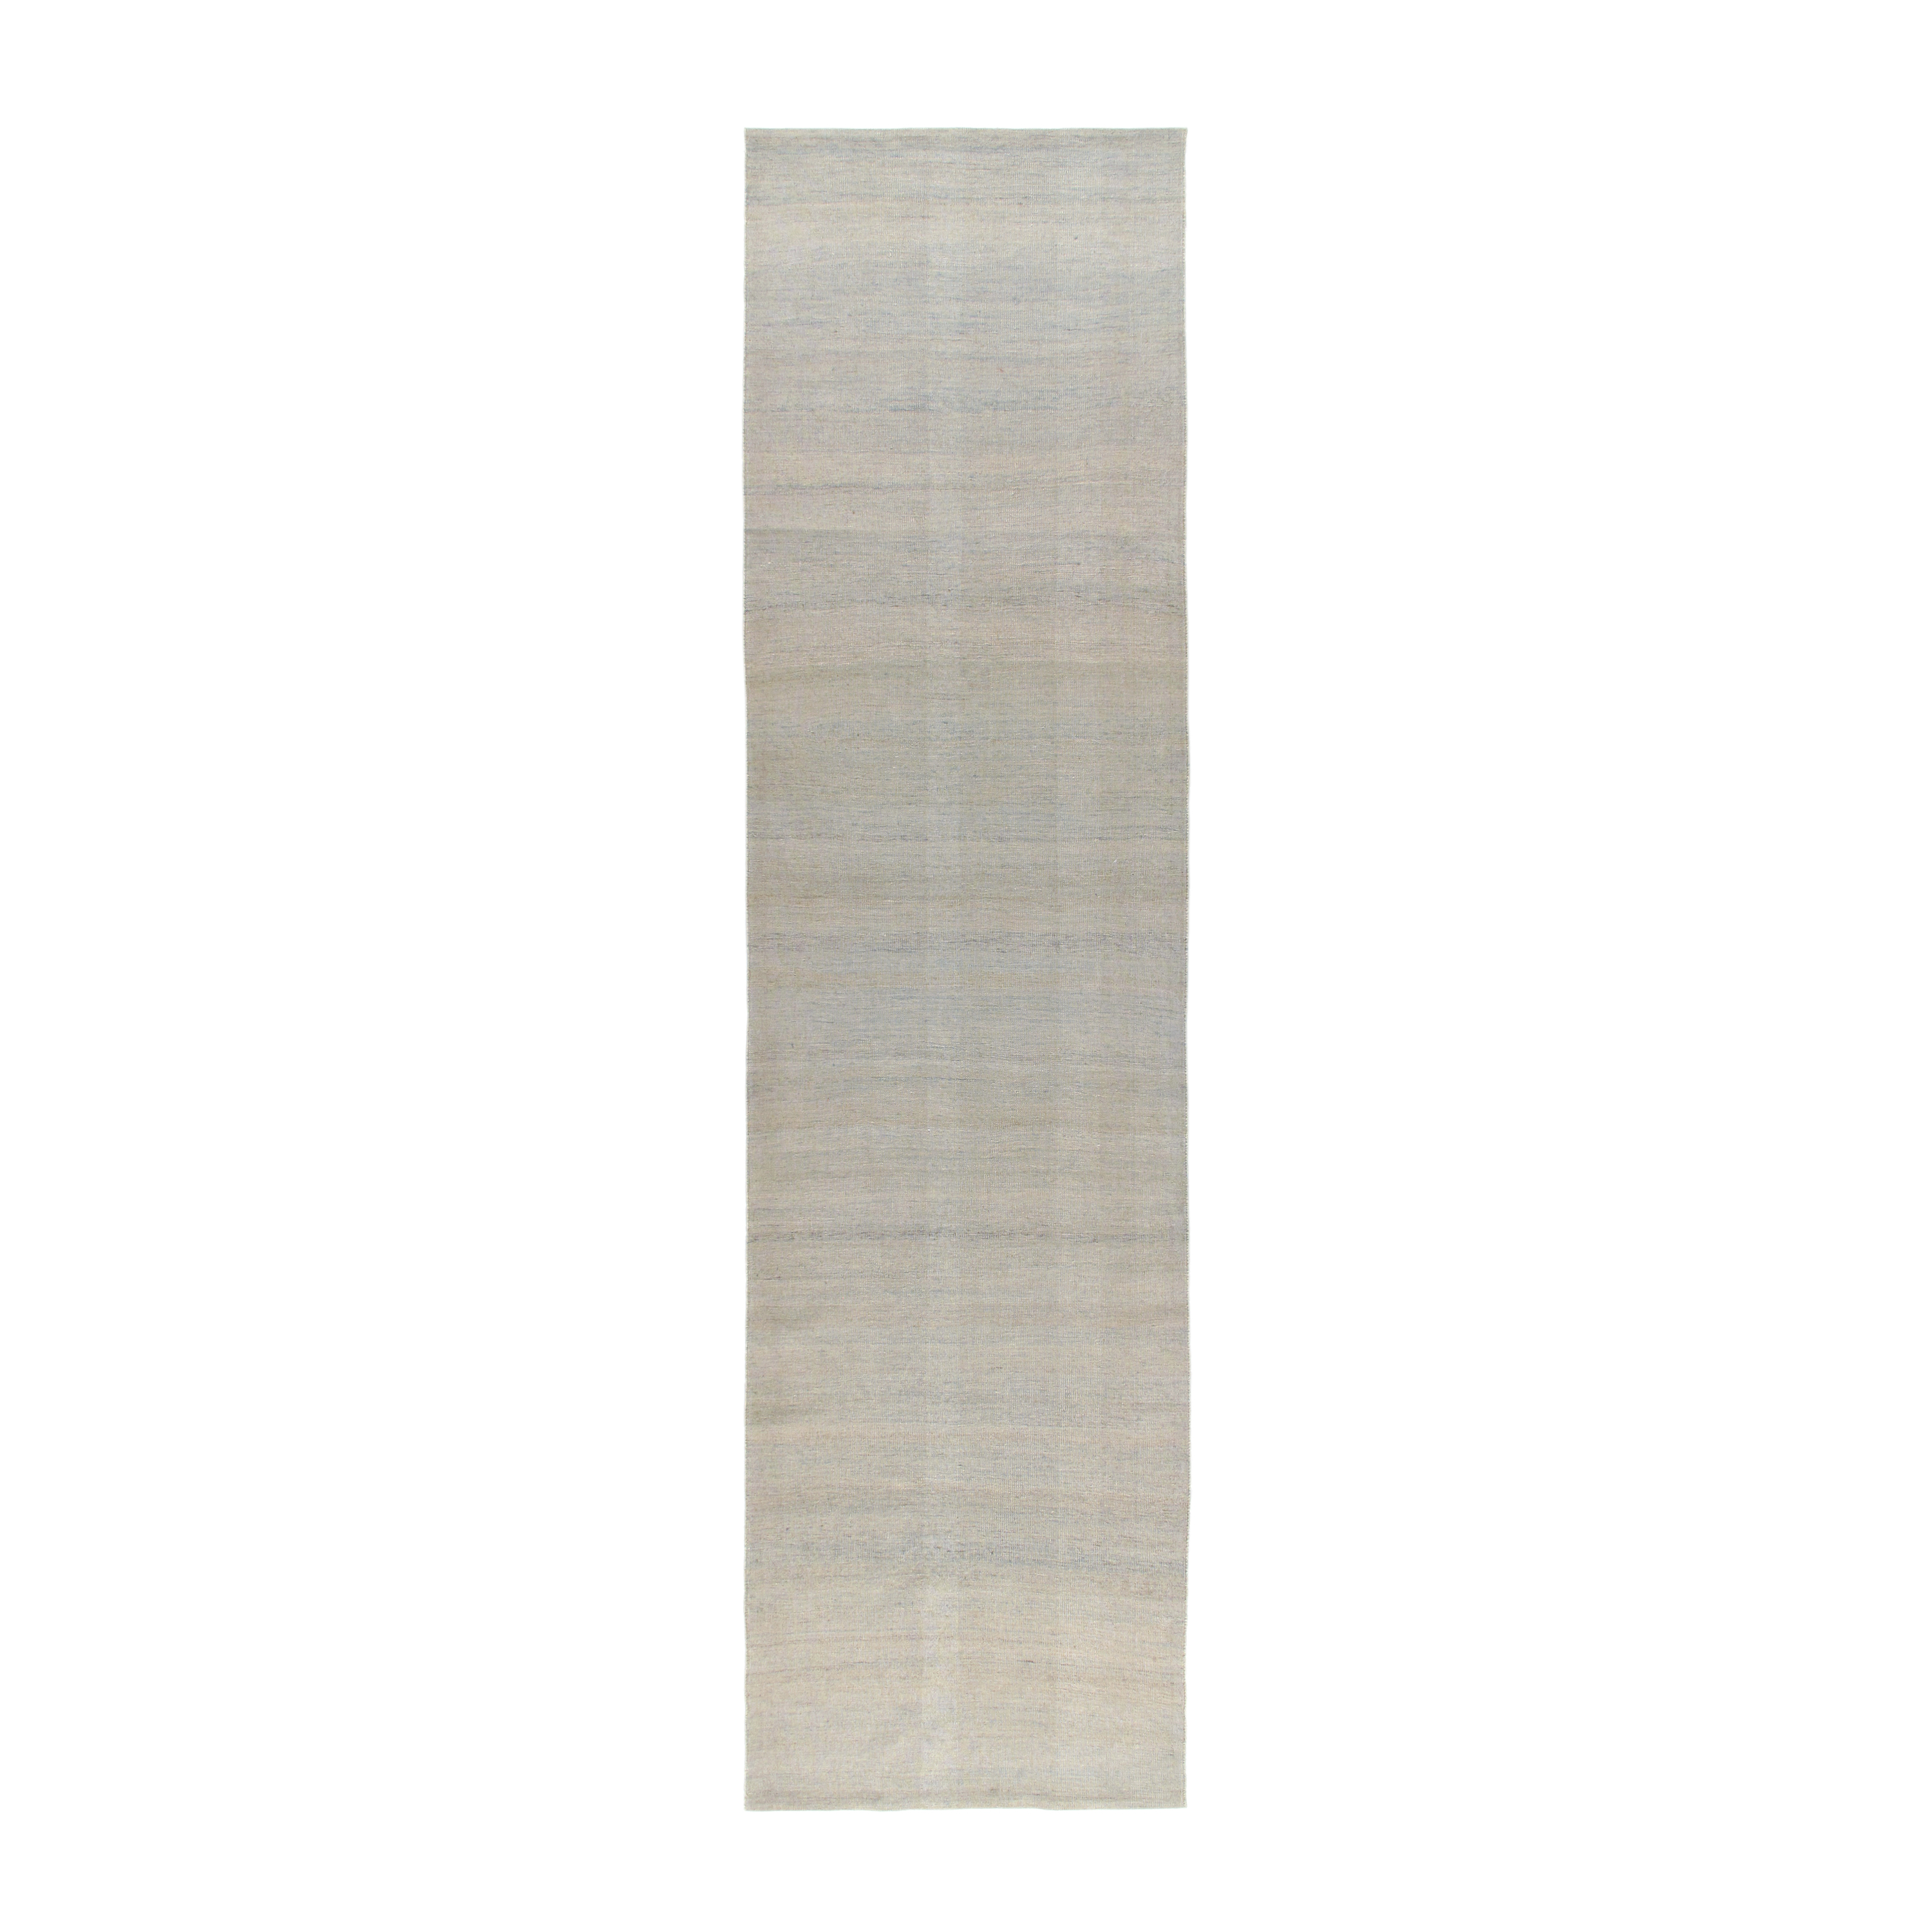 This Shiraz rug is hand-woven and made of 100% wool. 